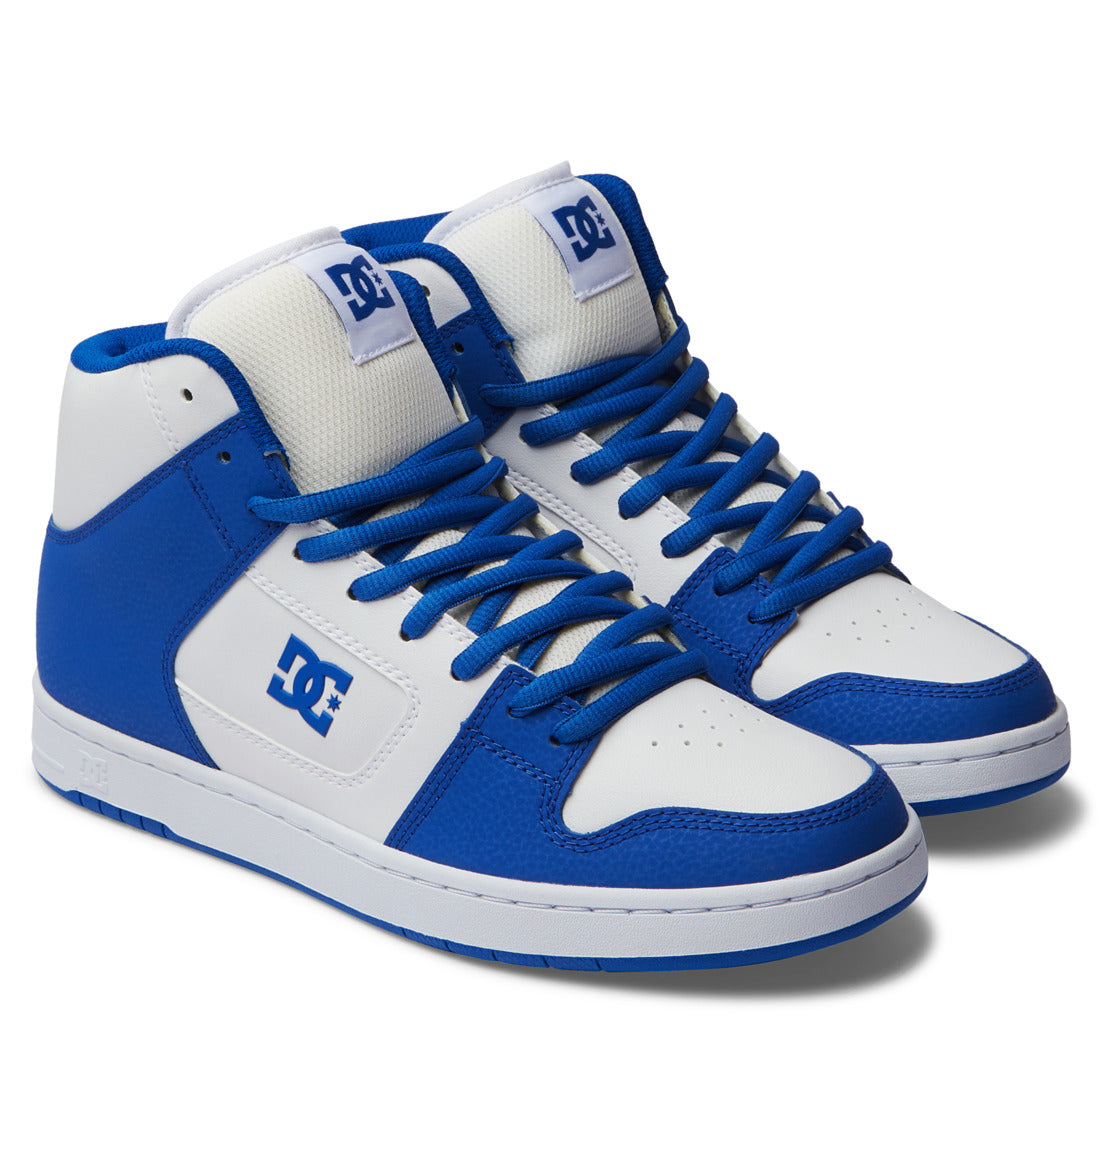 DC Manteca 4 HI Mens Shoes in blue and white colourway